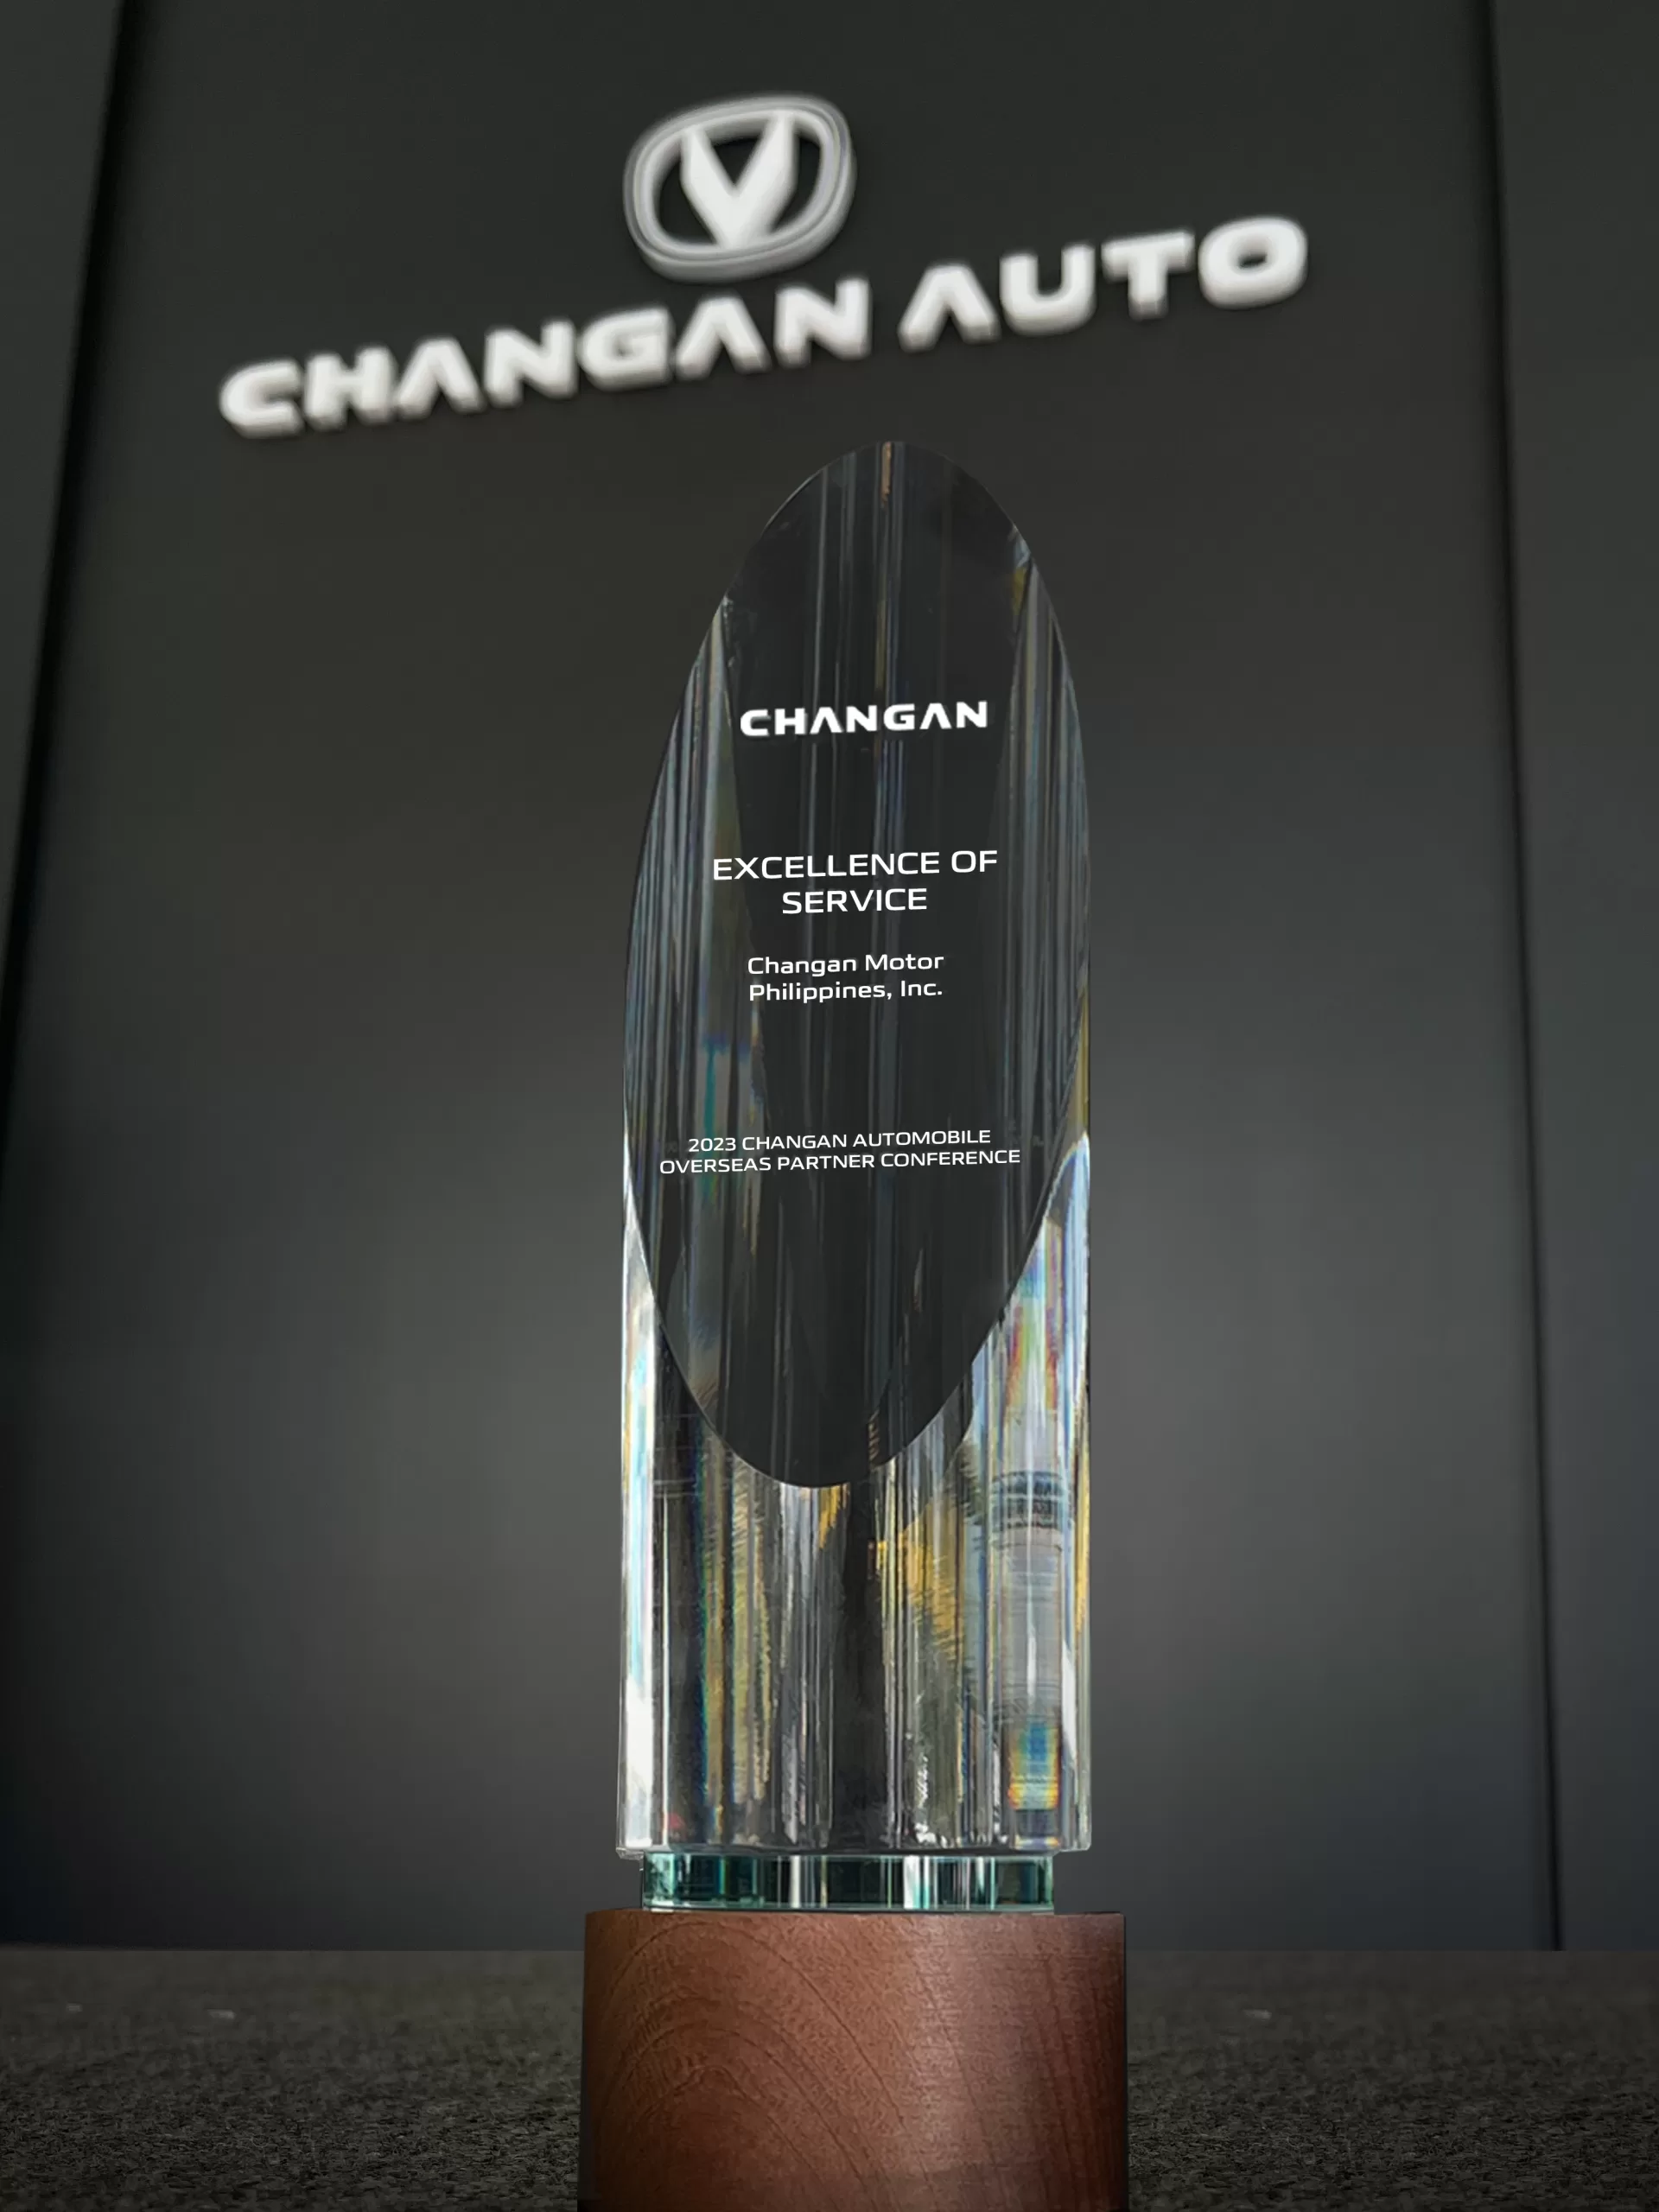 Changan Philippines Honored for Excellence of Service at 2023 Changan Partner Conference